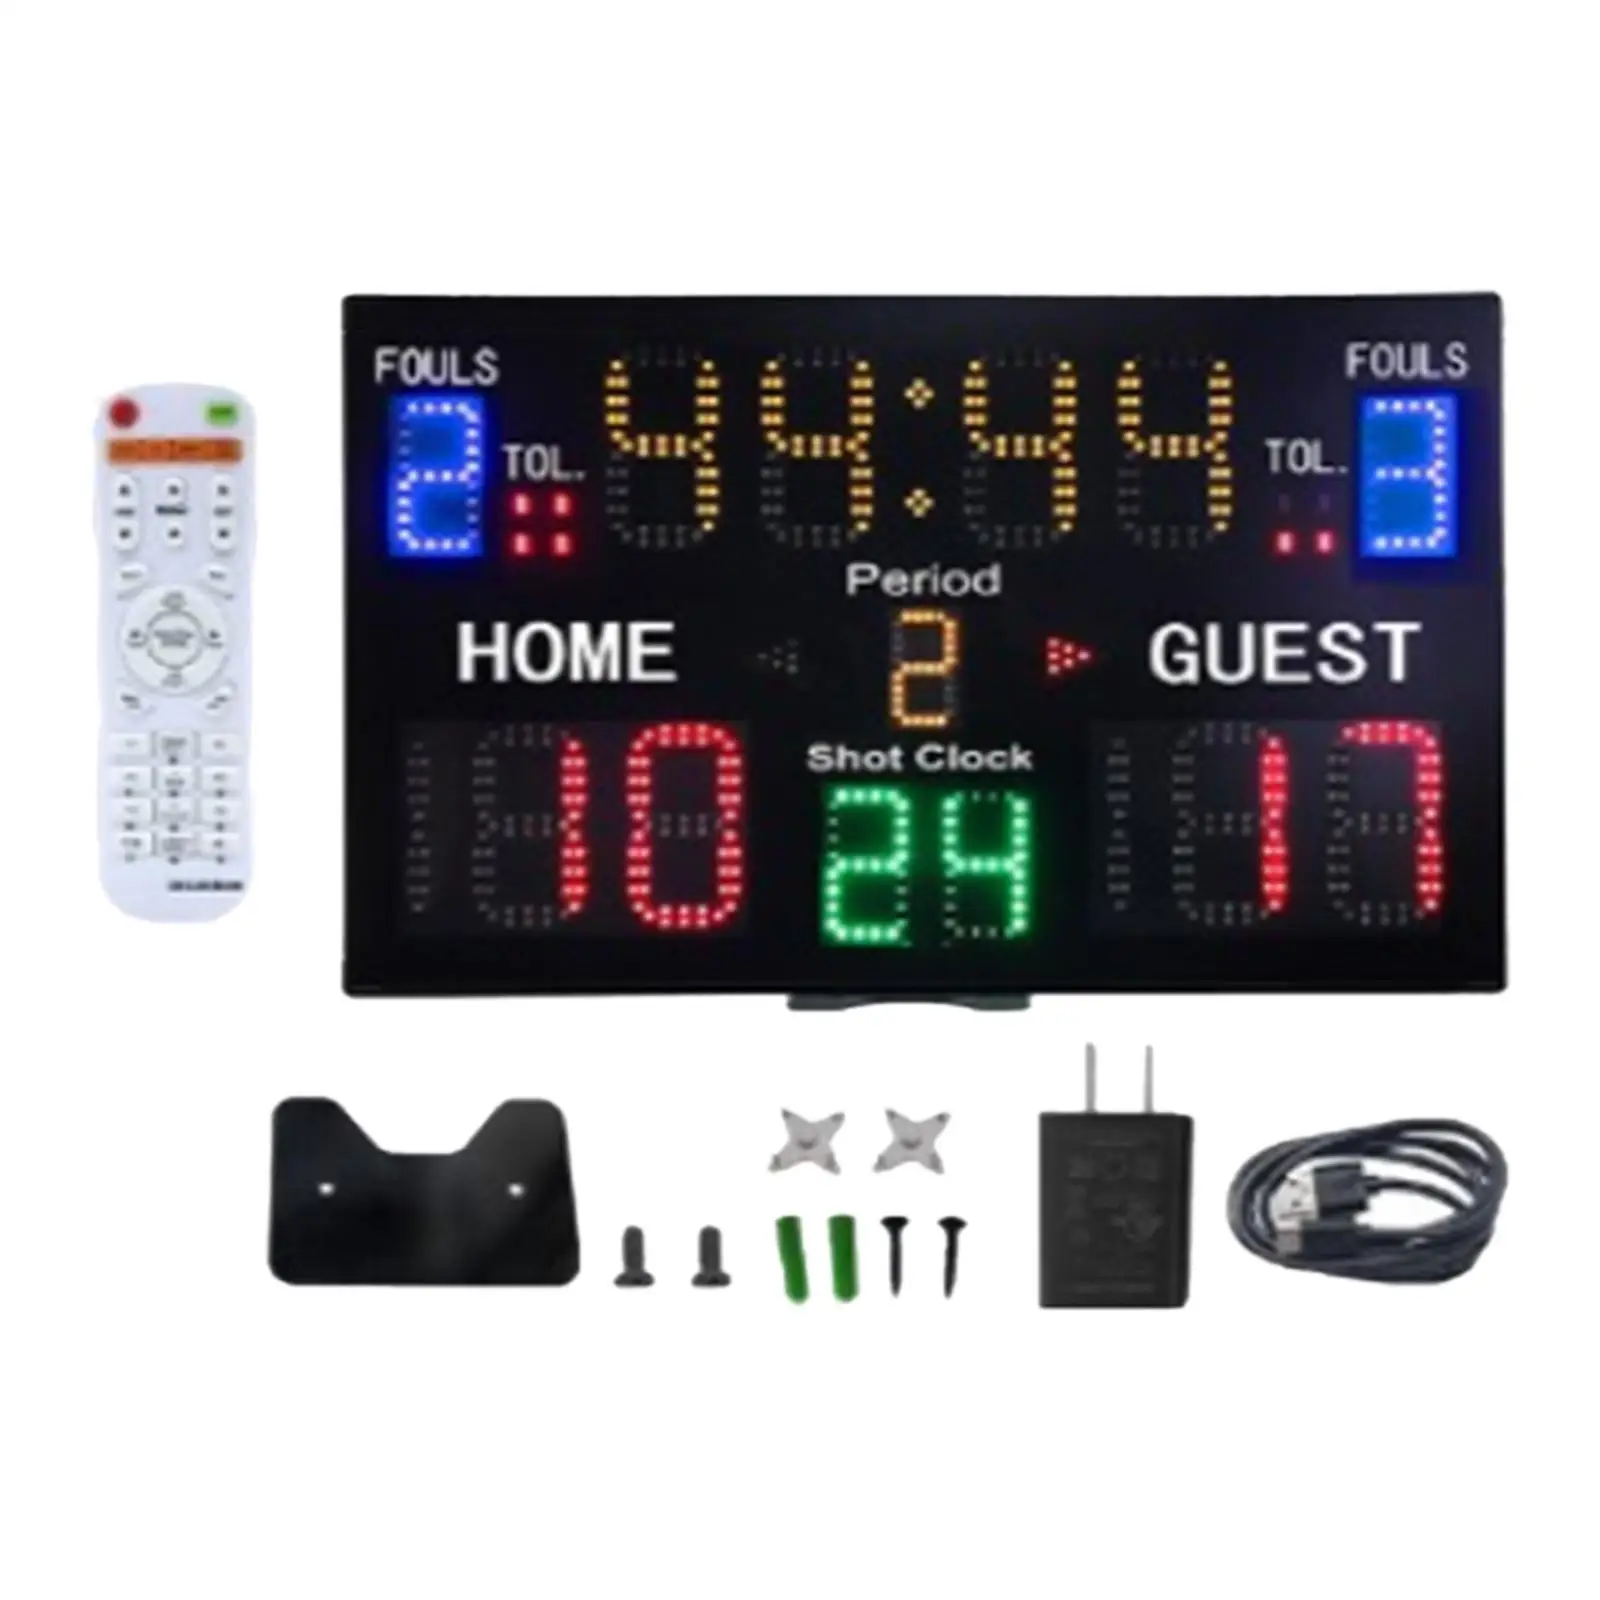 Professional Indoor Basketball Scoreboard Counter Foul Count Timer Wall Mount Electronic Digital Scoreboard for Games Outdoor